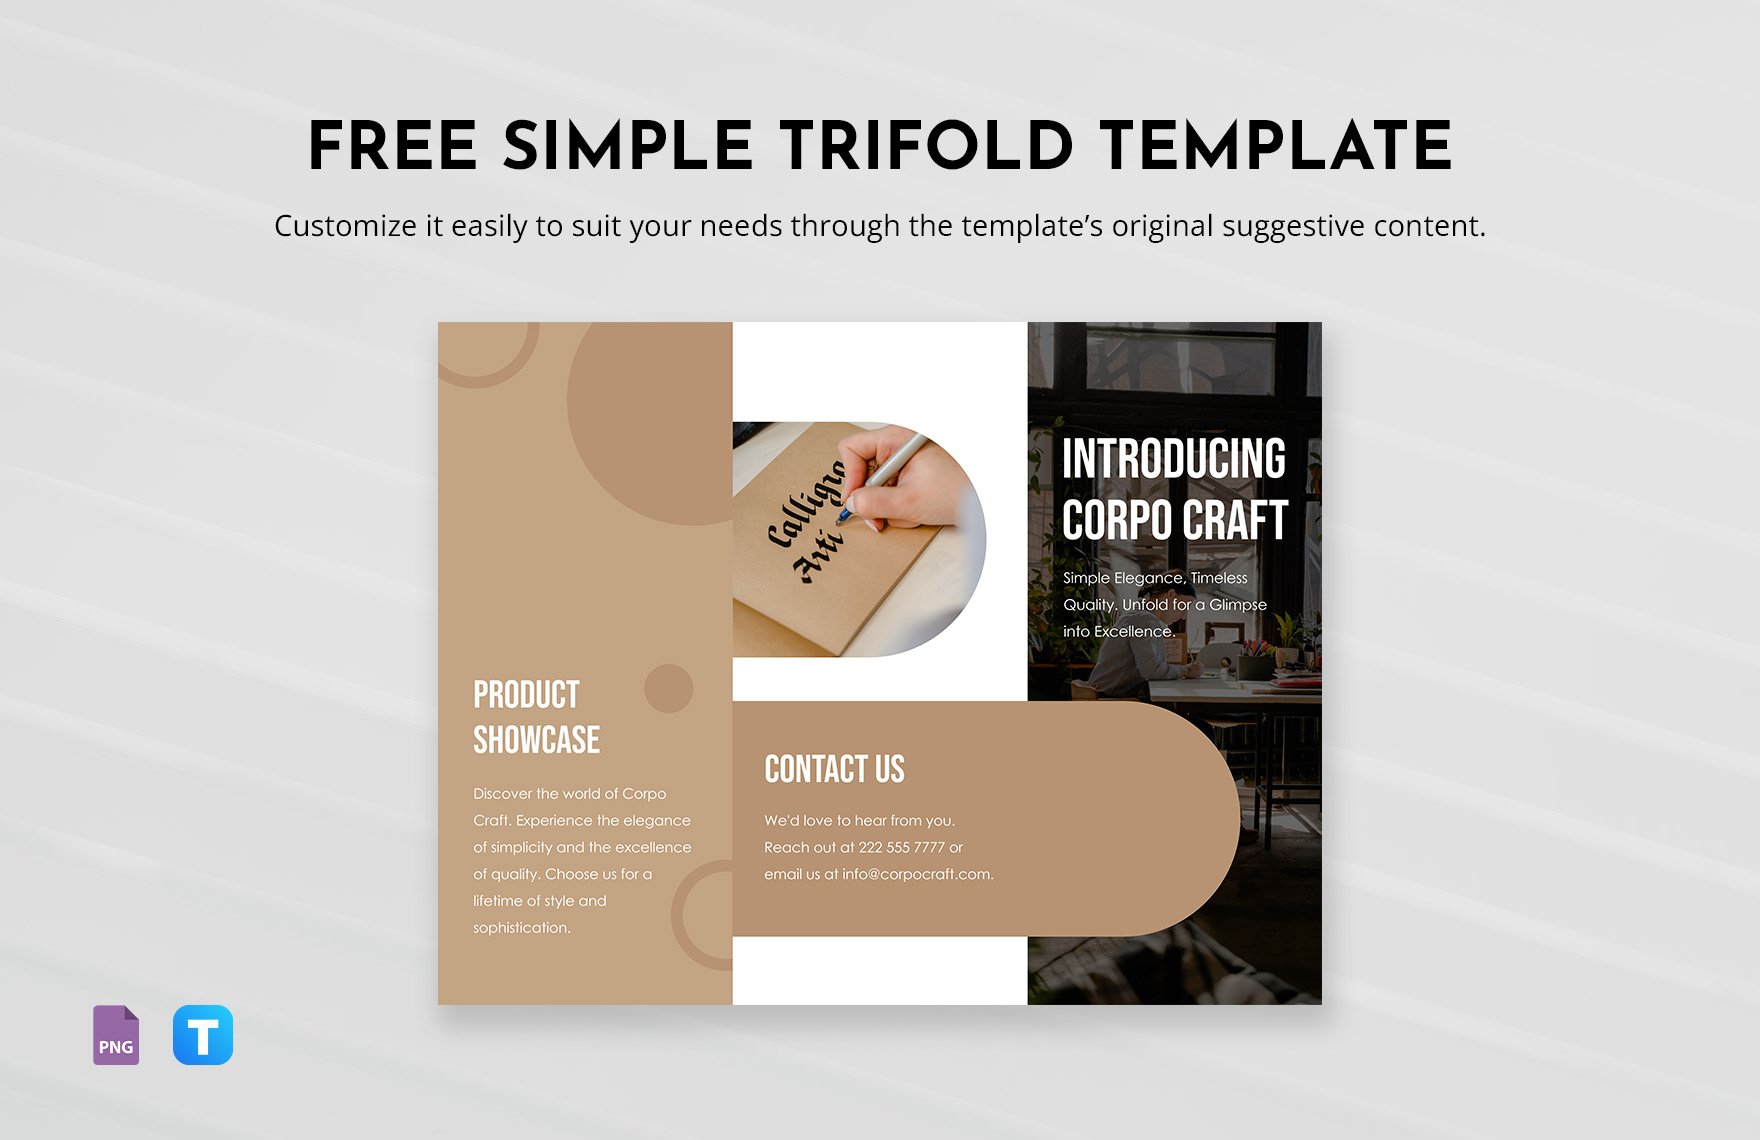 Free Simple Trifold Template